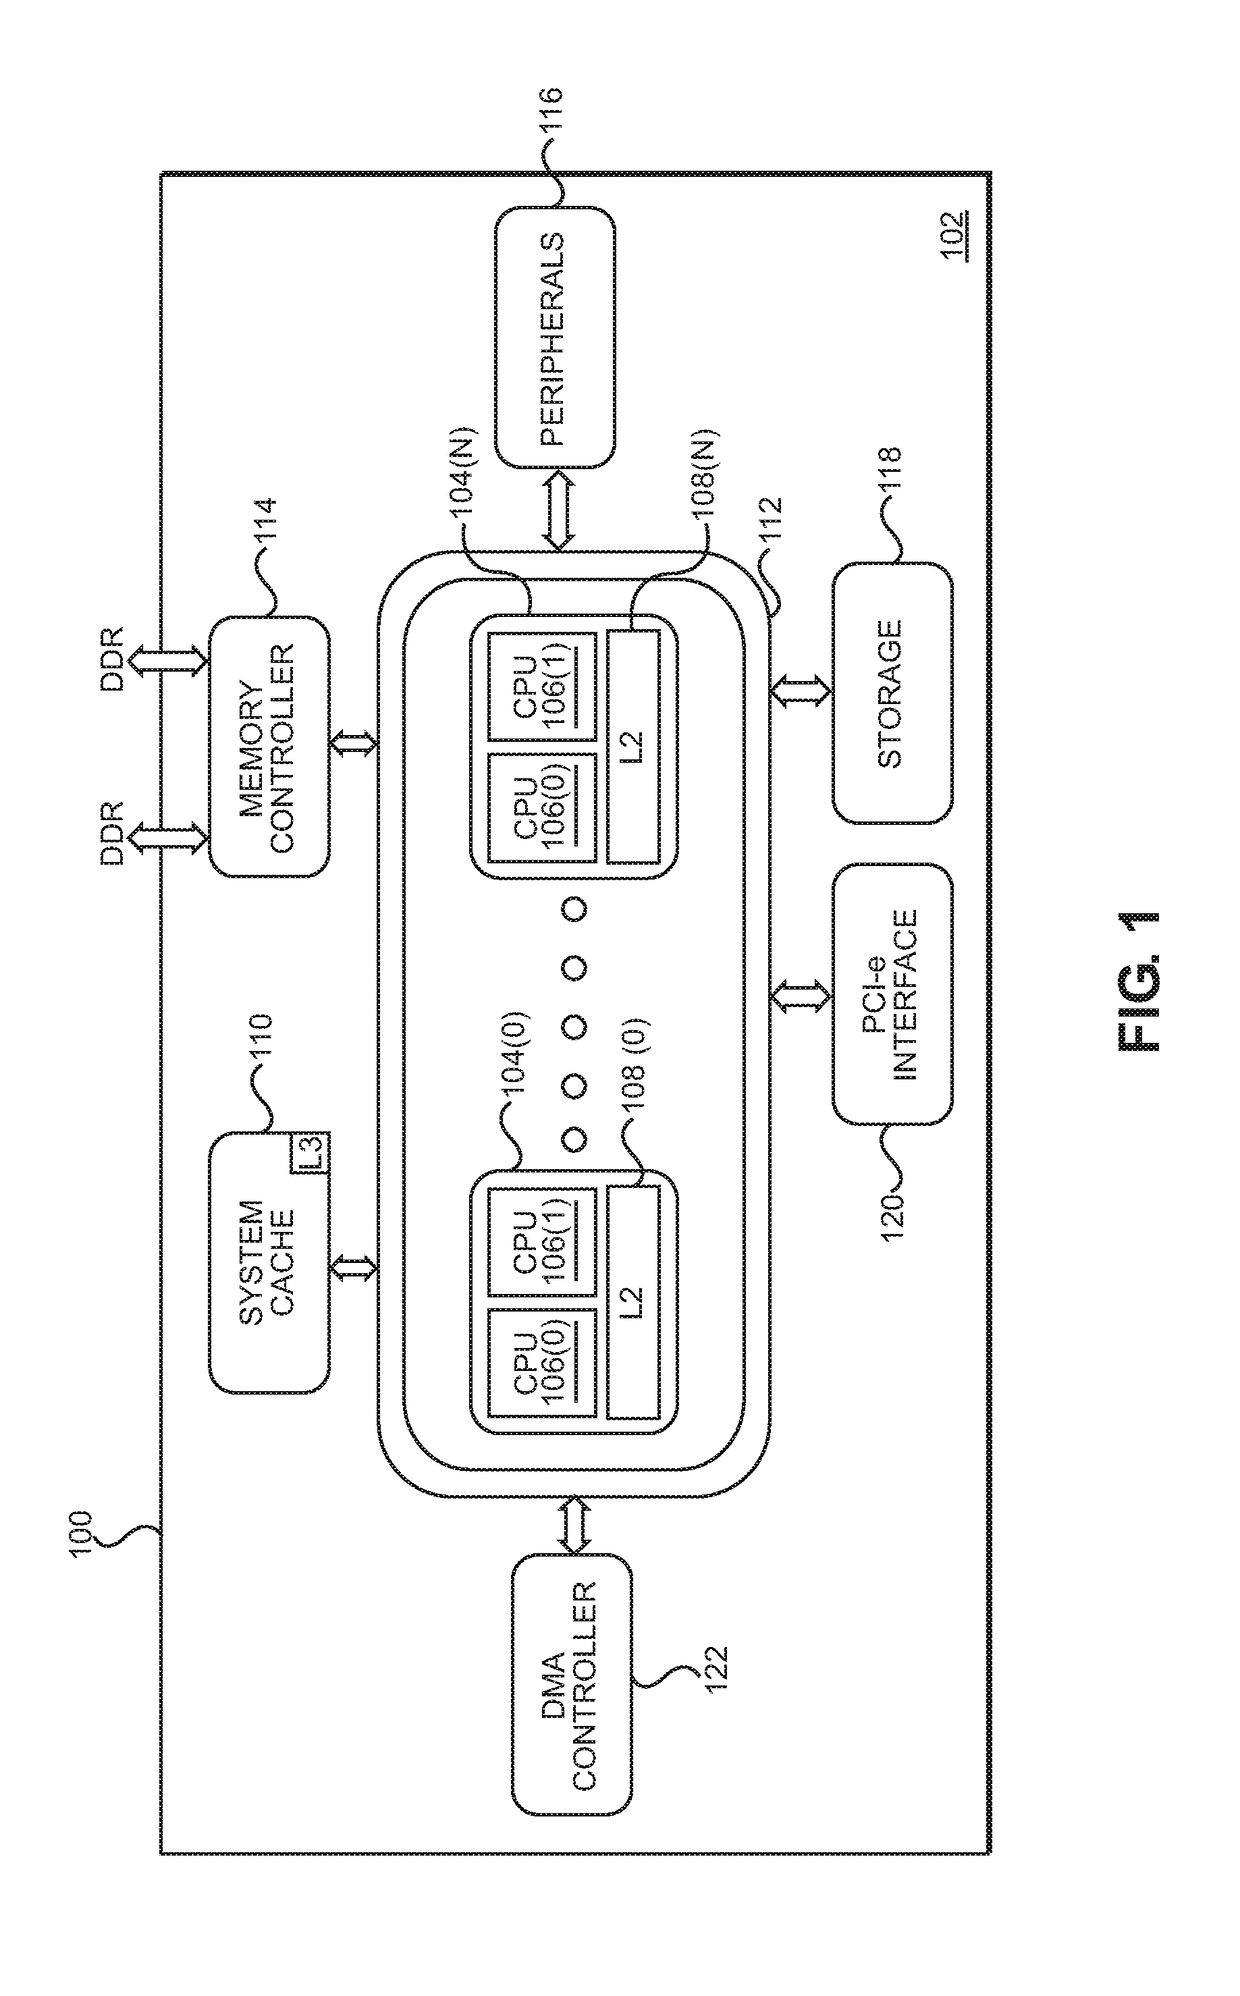 Providing memory bandwidth compression using adaptive compression in central processing unit (CPU)-based systems